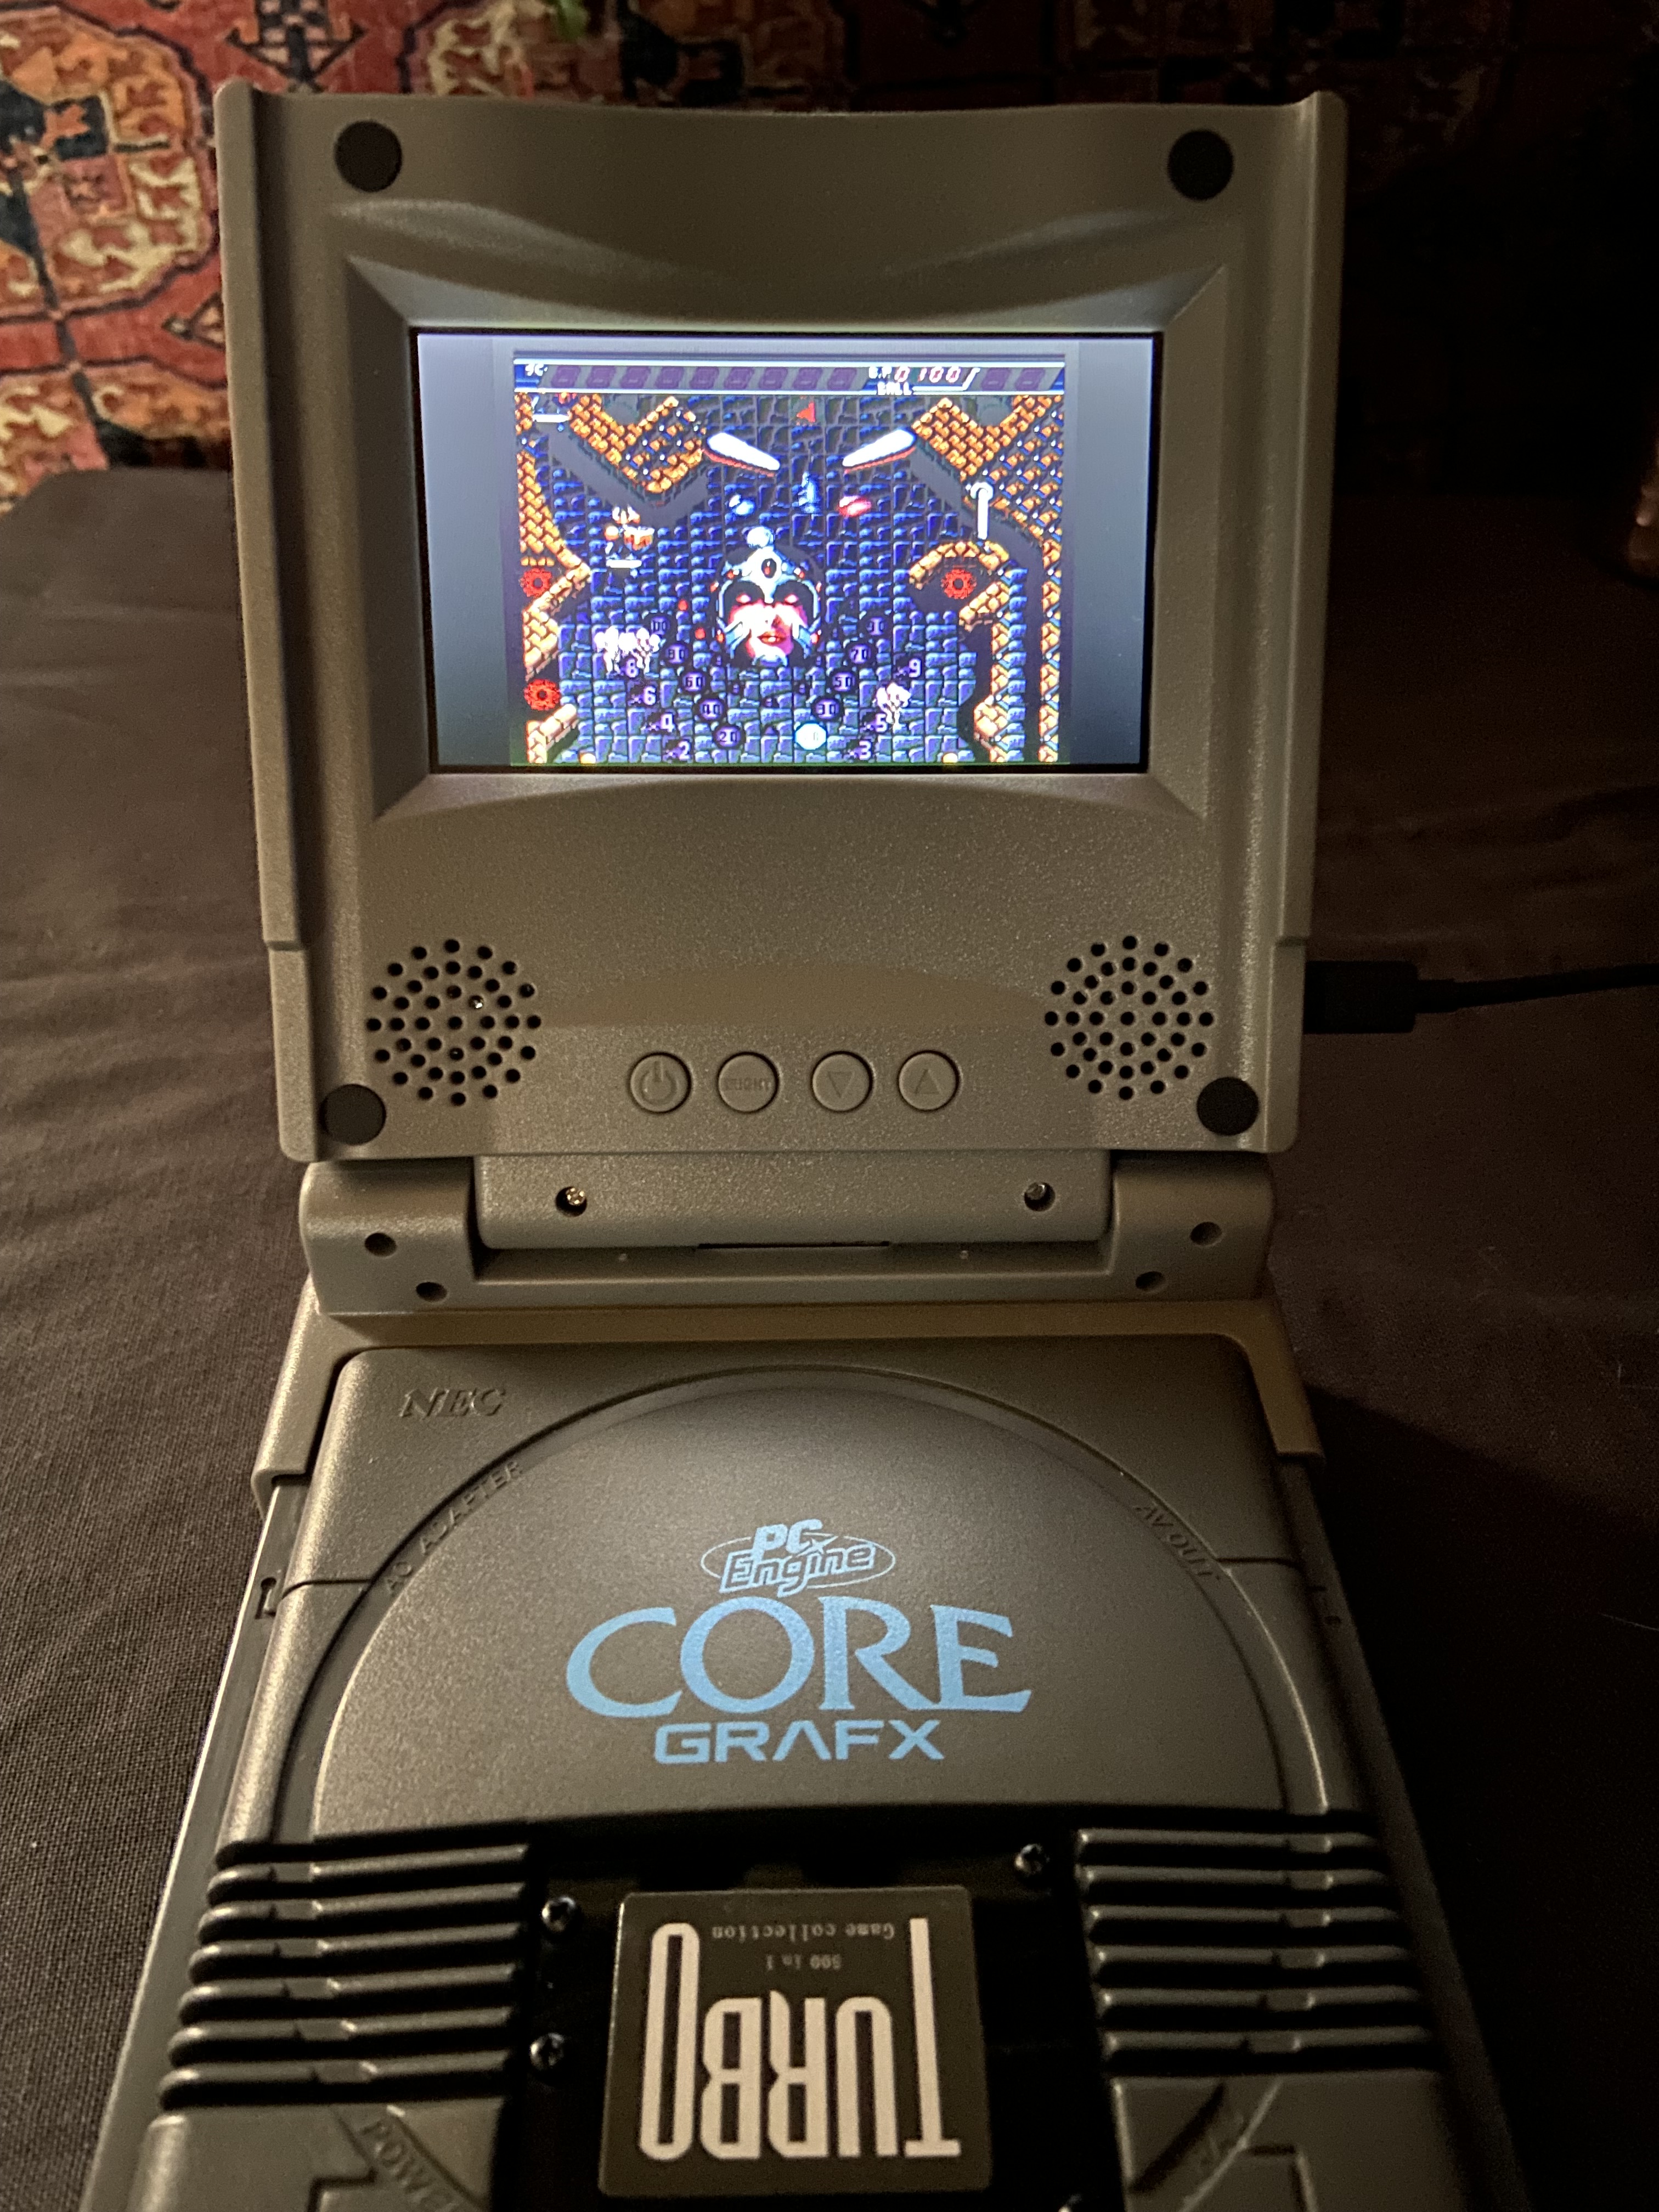 Aftermarket Portable Monitor LCD for PC Engine in action